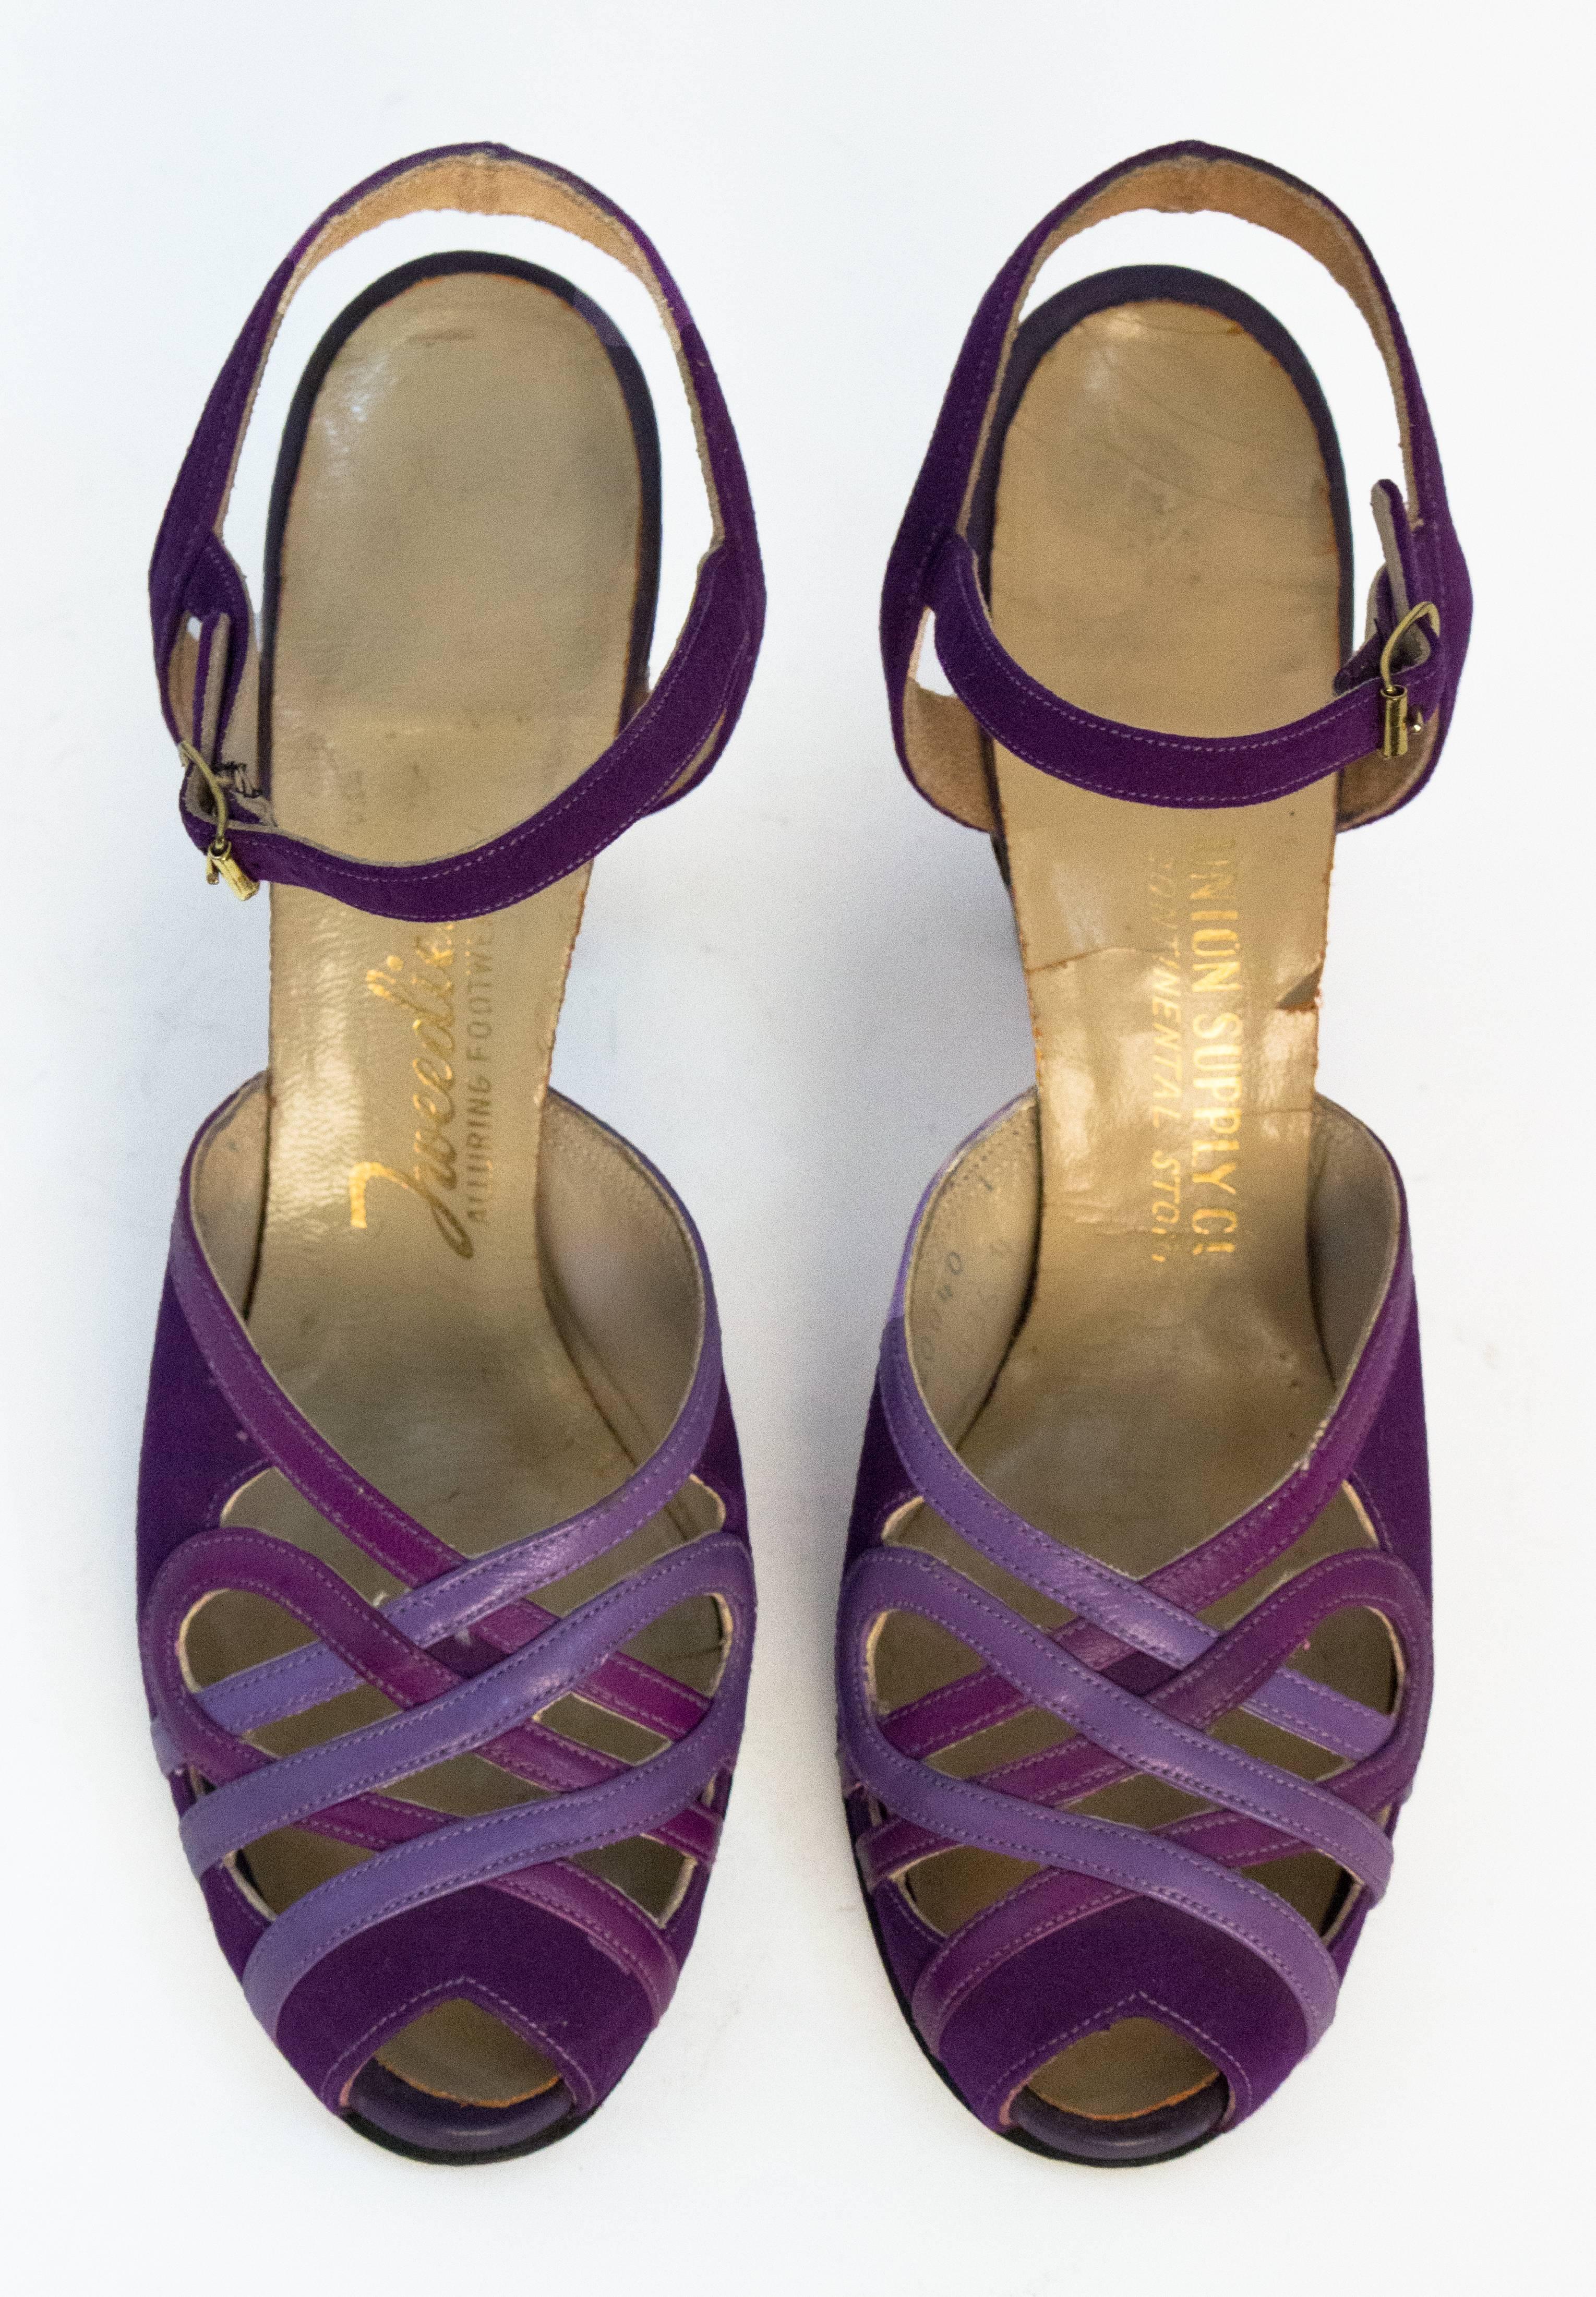 40s purple suede & leather ankle strap heels. Gold tone buckles at side of straps. 

Measurements:
Insole: 9 1/4